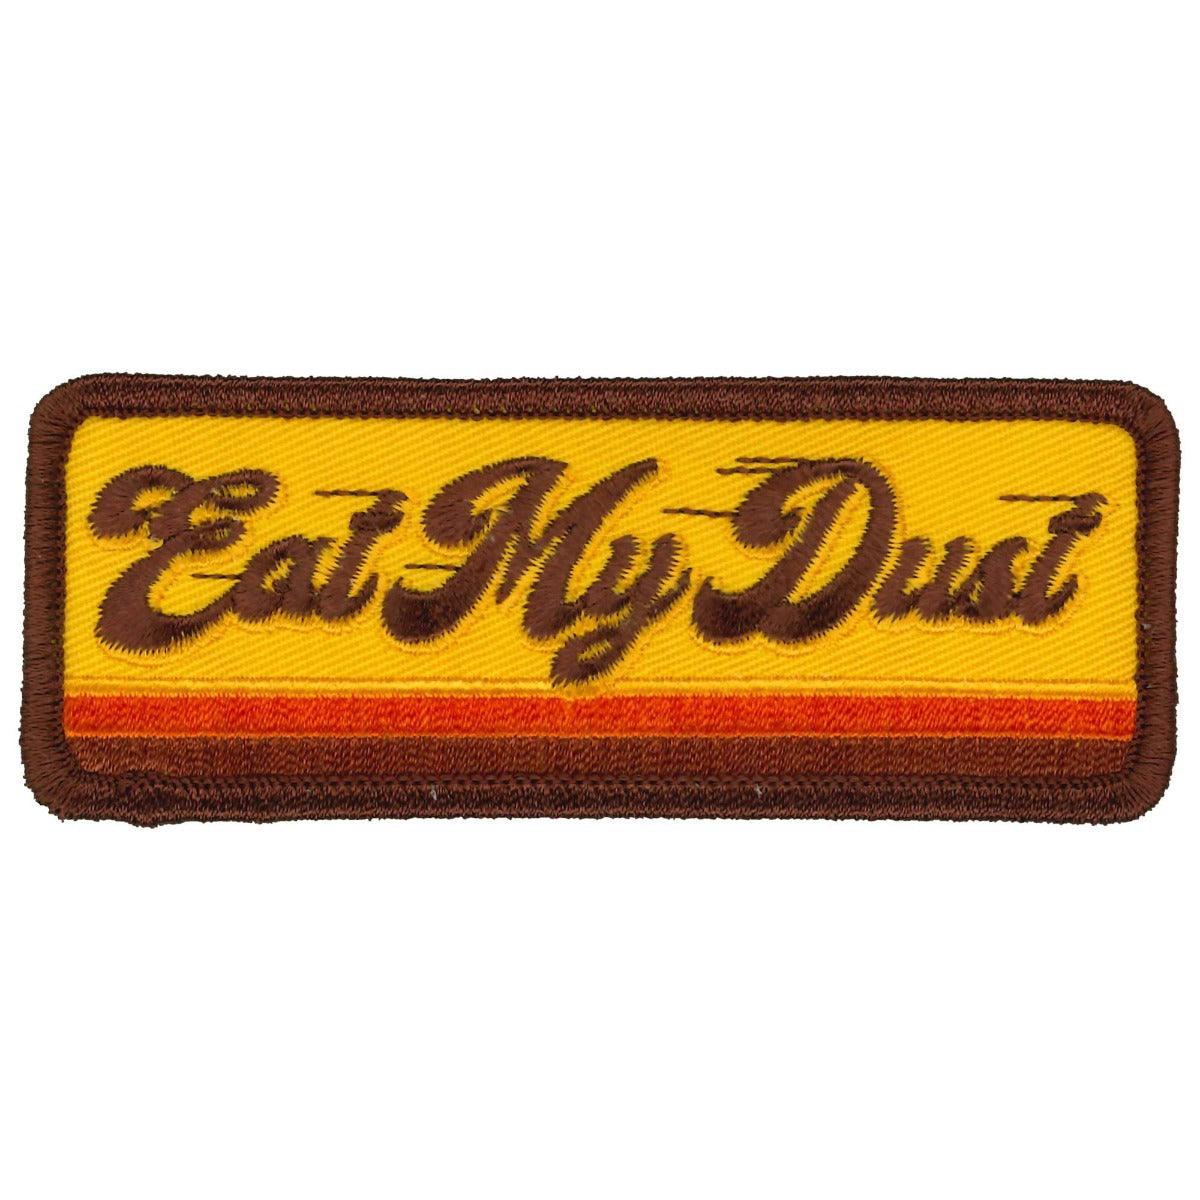 Hot Leathers Eat My Dust 4" X 2" Patch - American Legend Rider